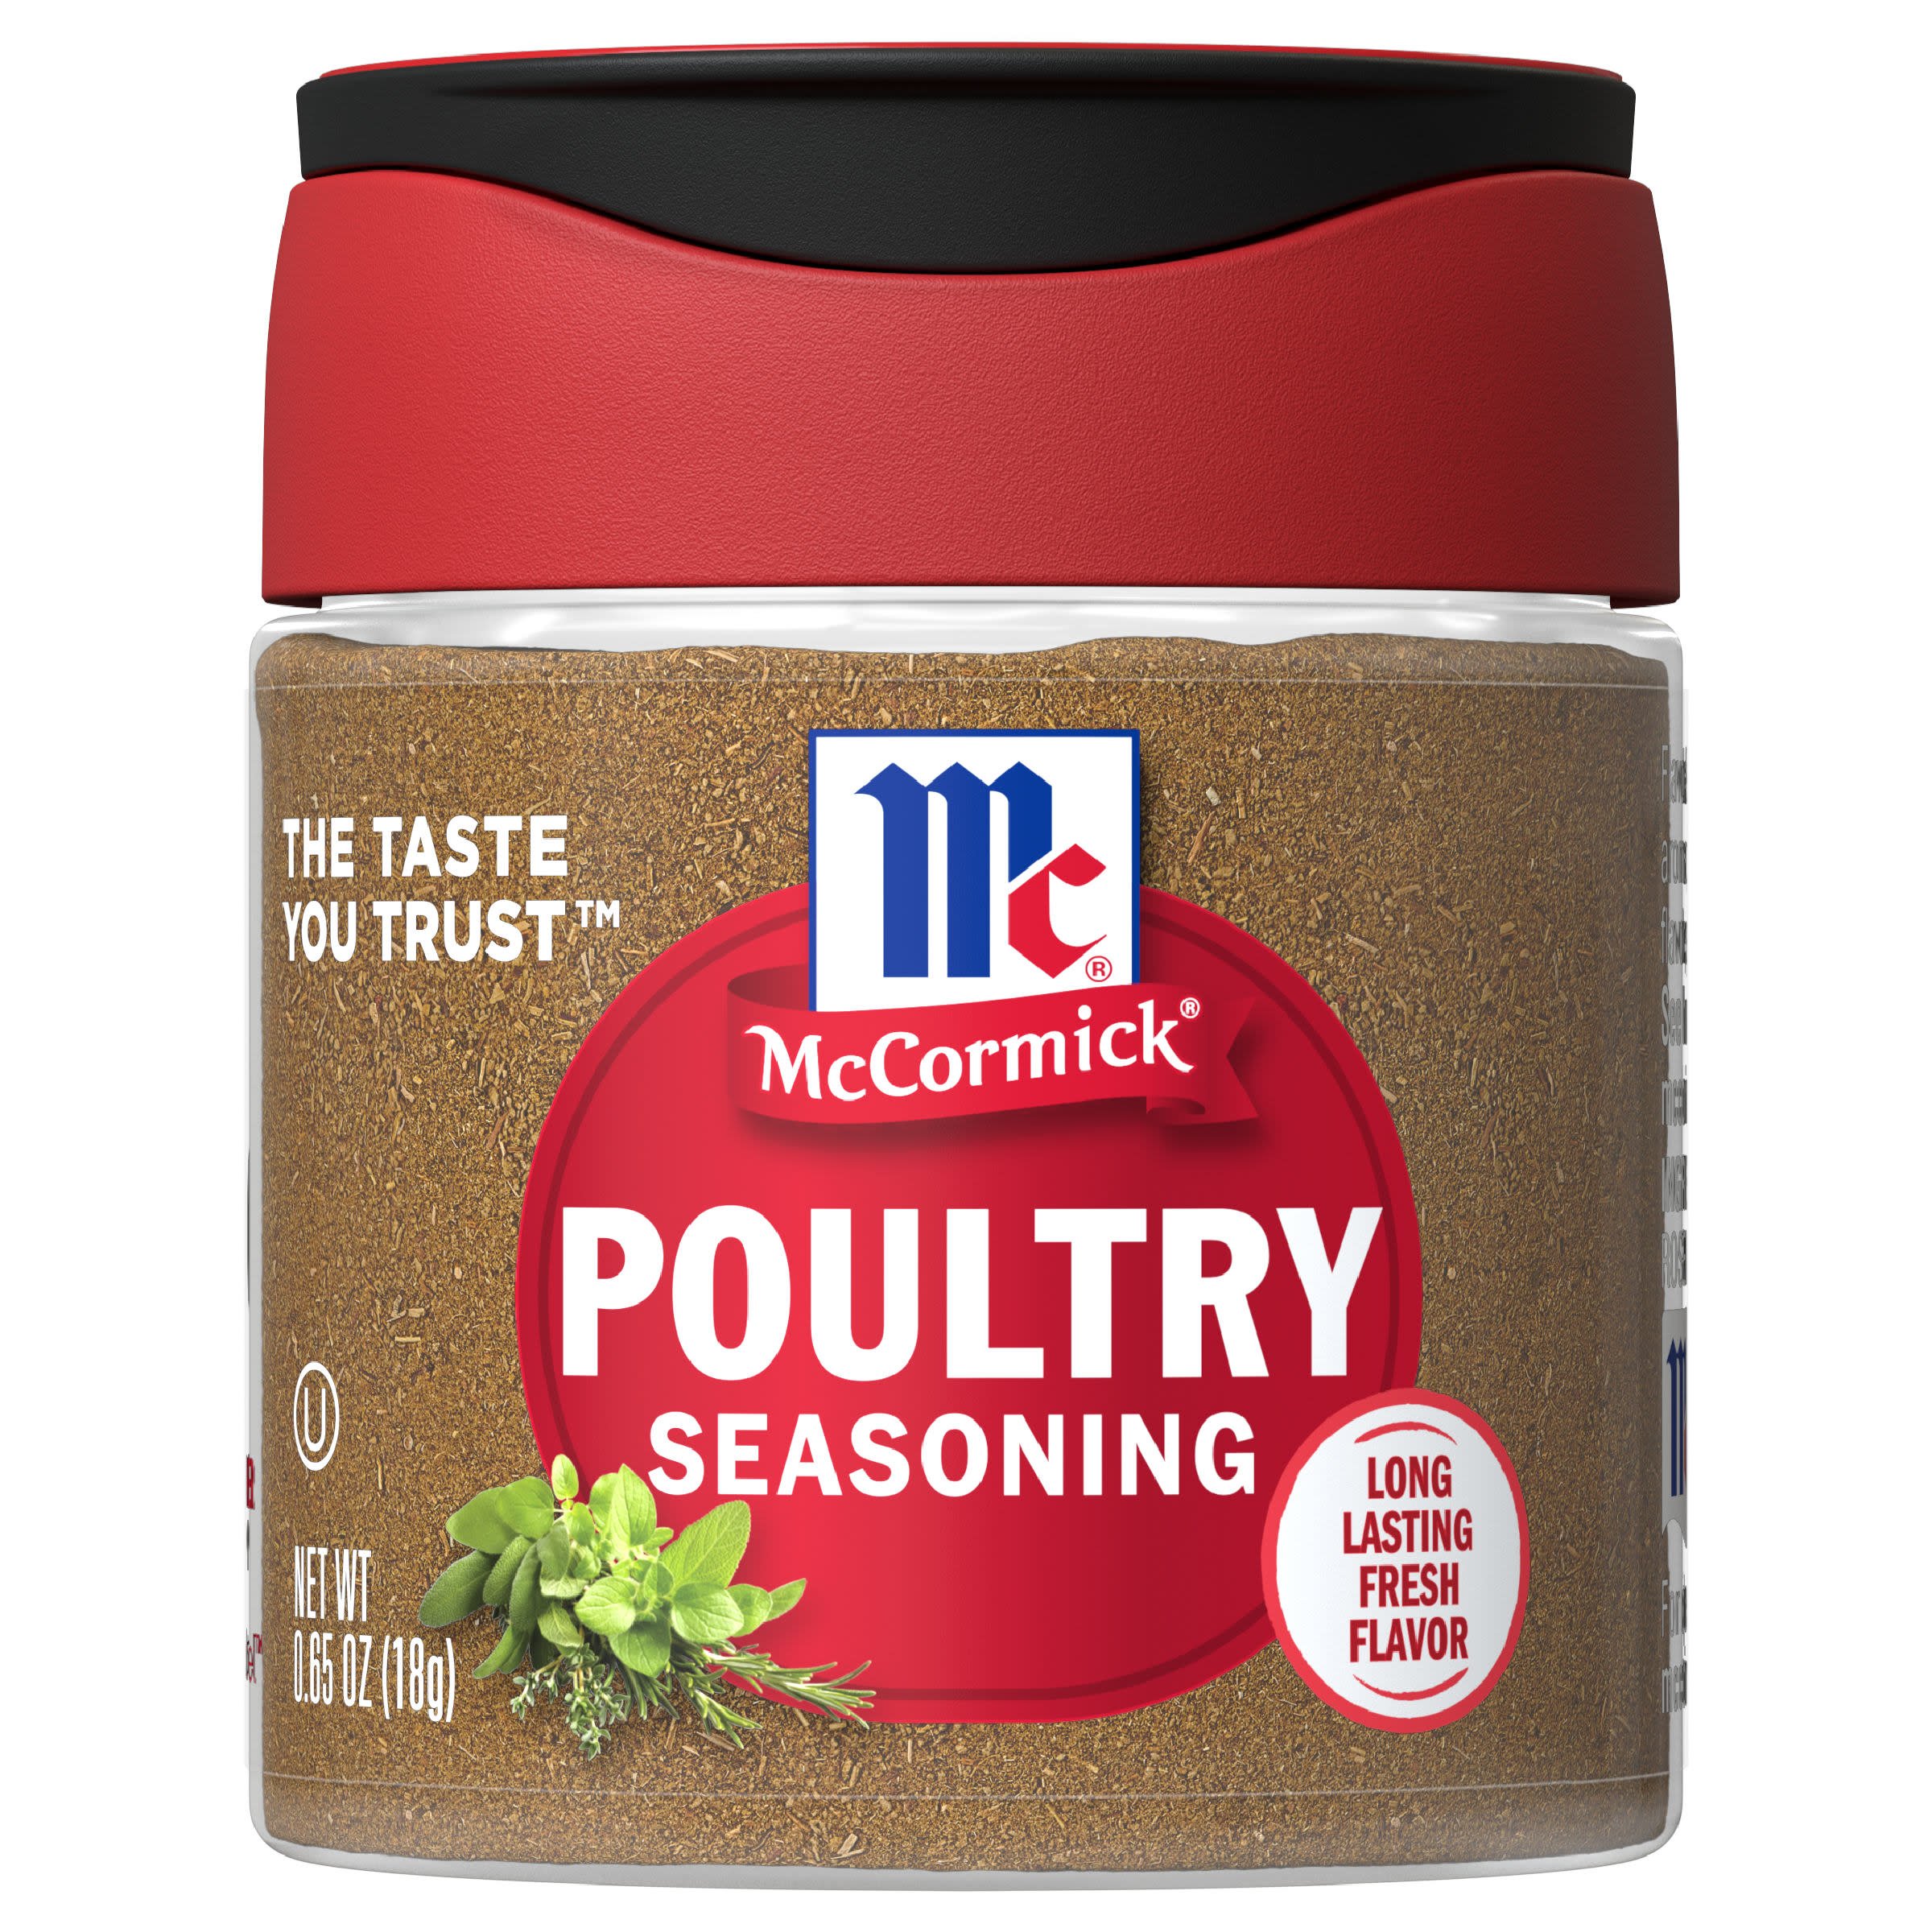 McCormick Poultry Seasoning Shop Spice Mixes at HEB